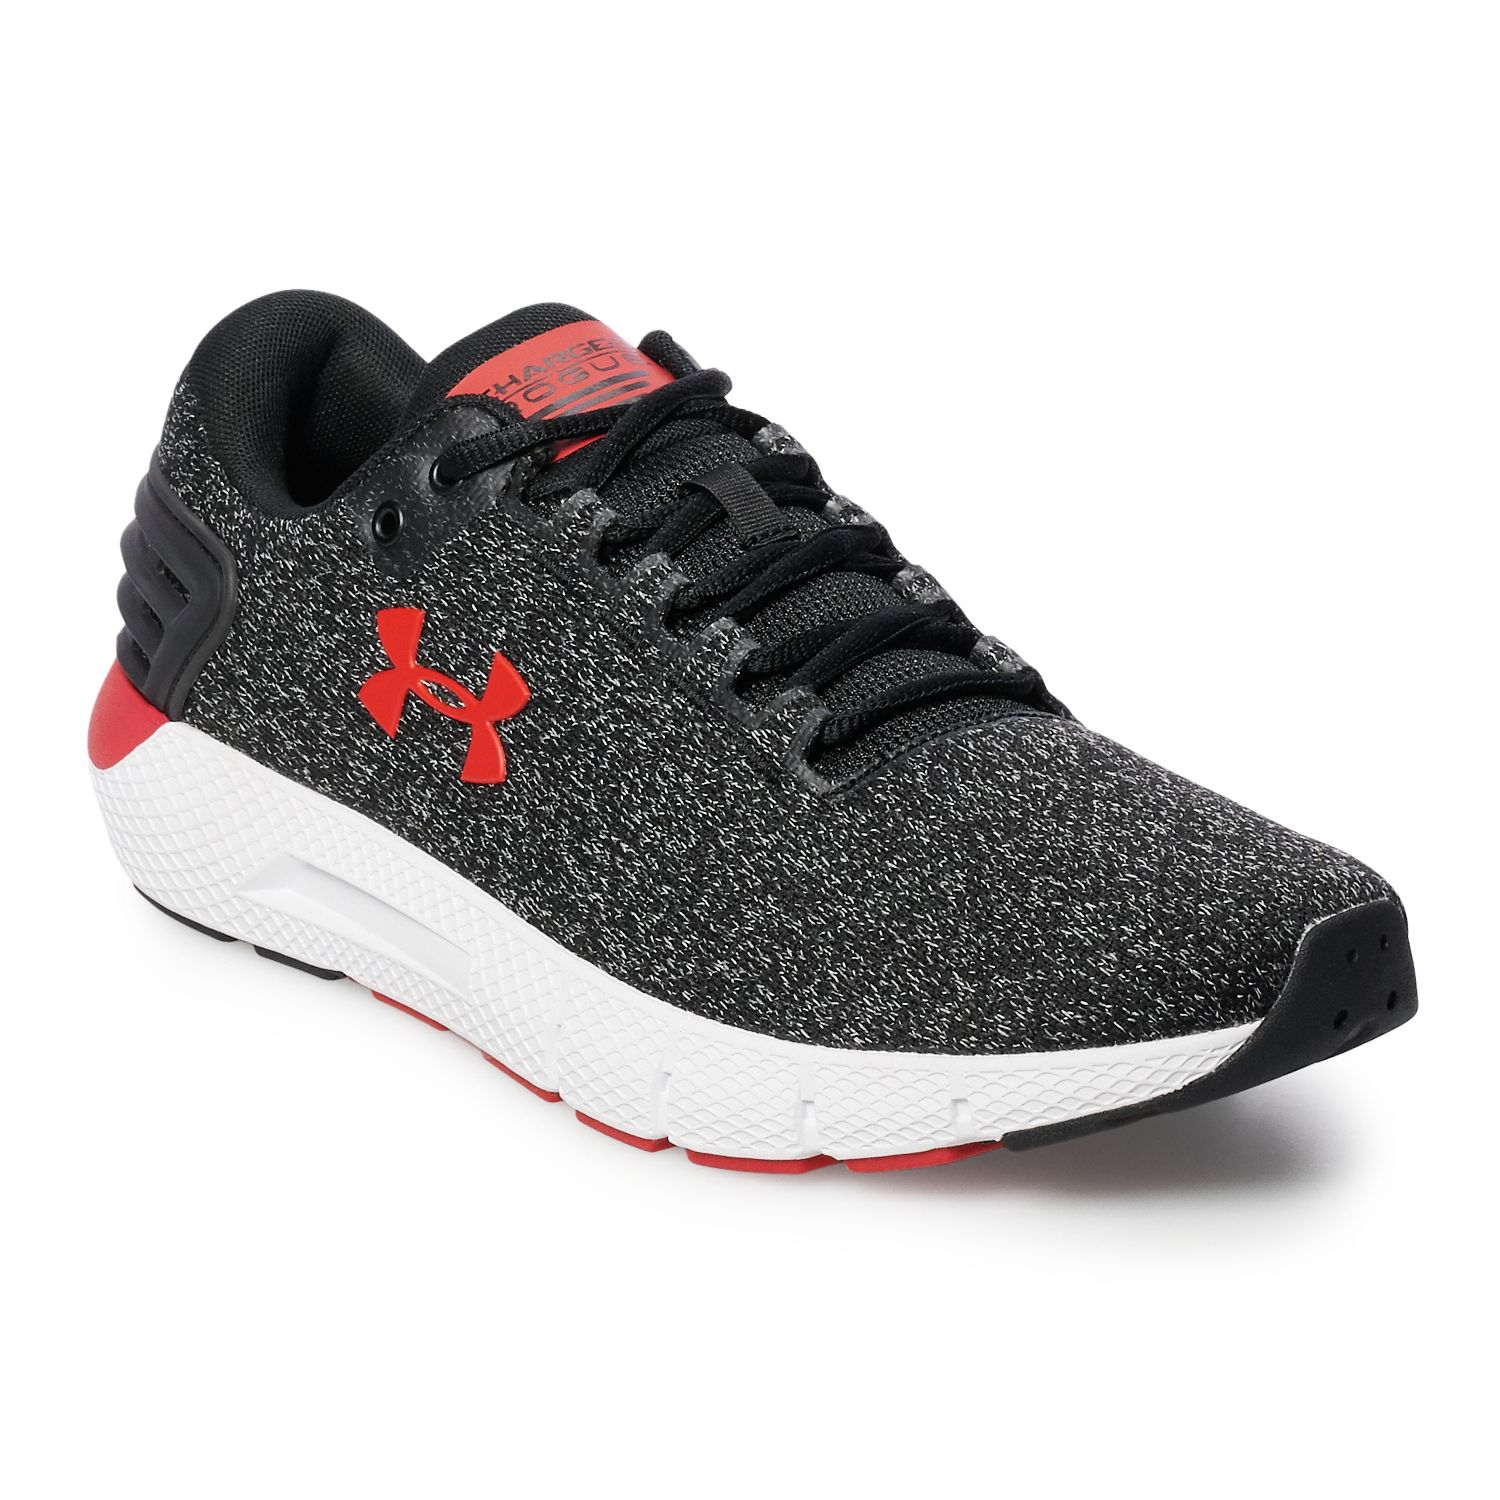 Under Armour Charged Rogue Twist Men's 